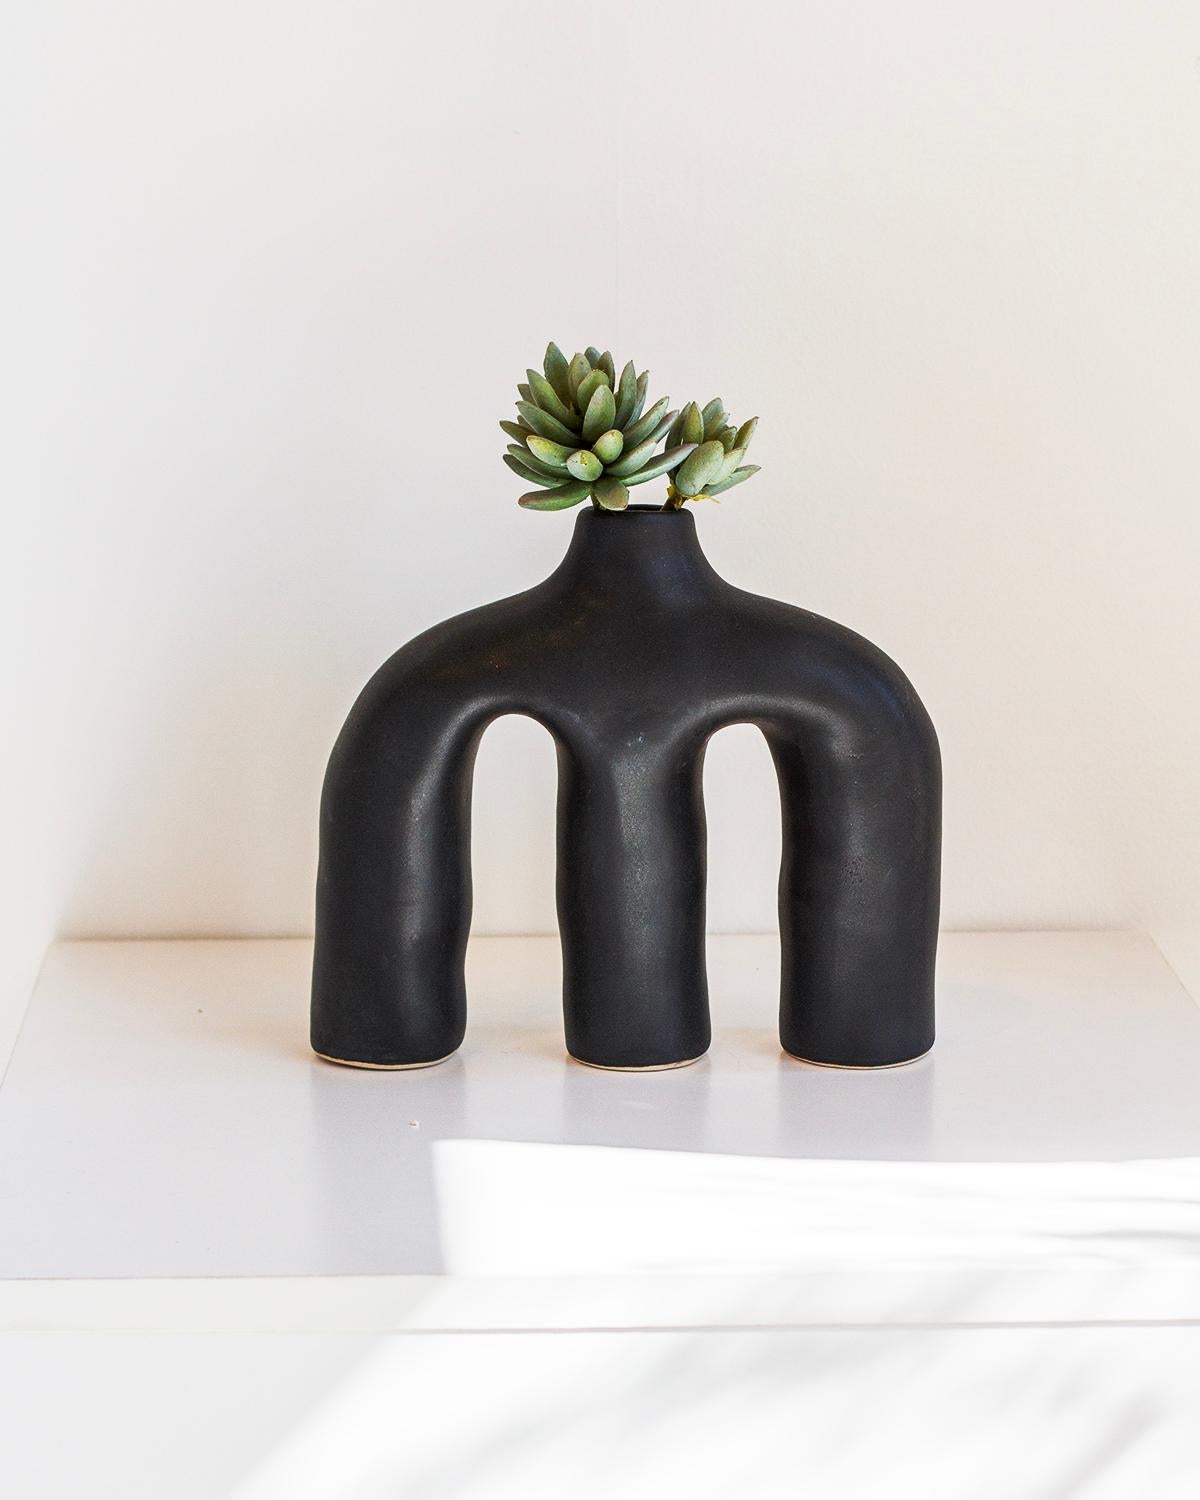 This Anatomy Clay Vase is an organic modern, handmade home decor piece that radiates quiet luxury. Its charcoal black color and three pronged design add minimalist beauty to any space. Enhance your living space with quality and design.

Only one of